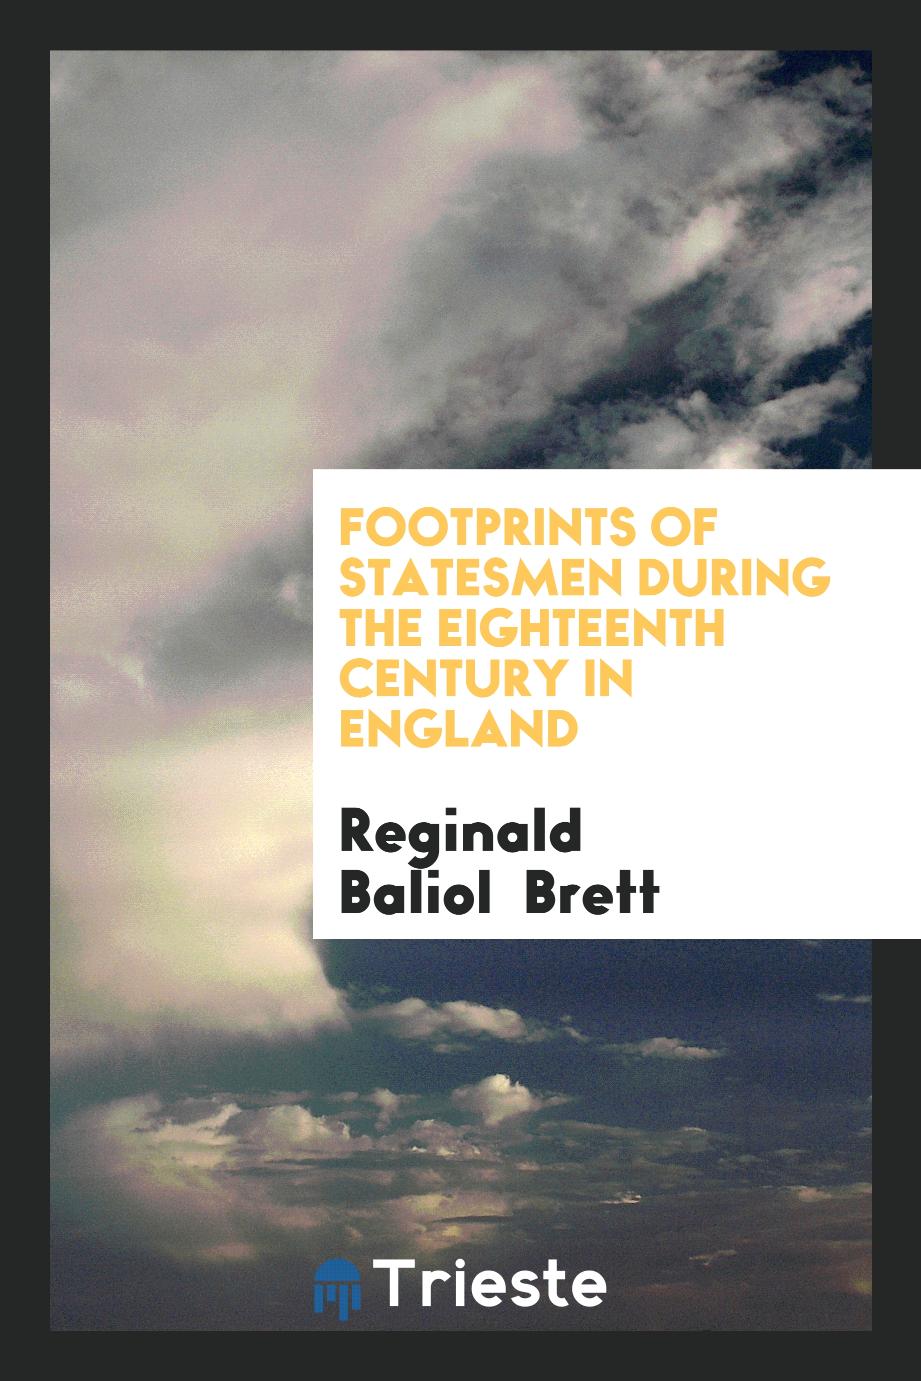 Footprints of Statesmen During the Eighteenth Century in England